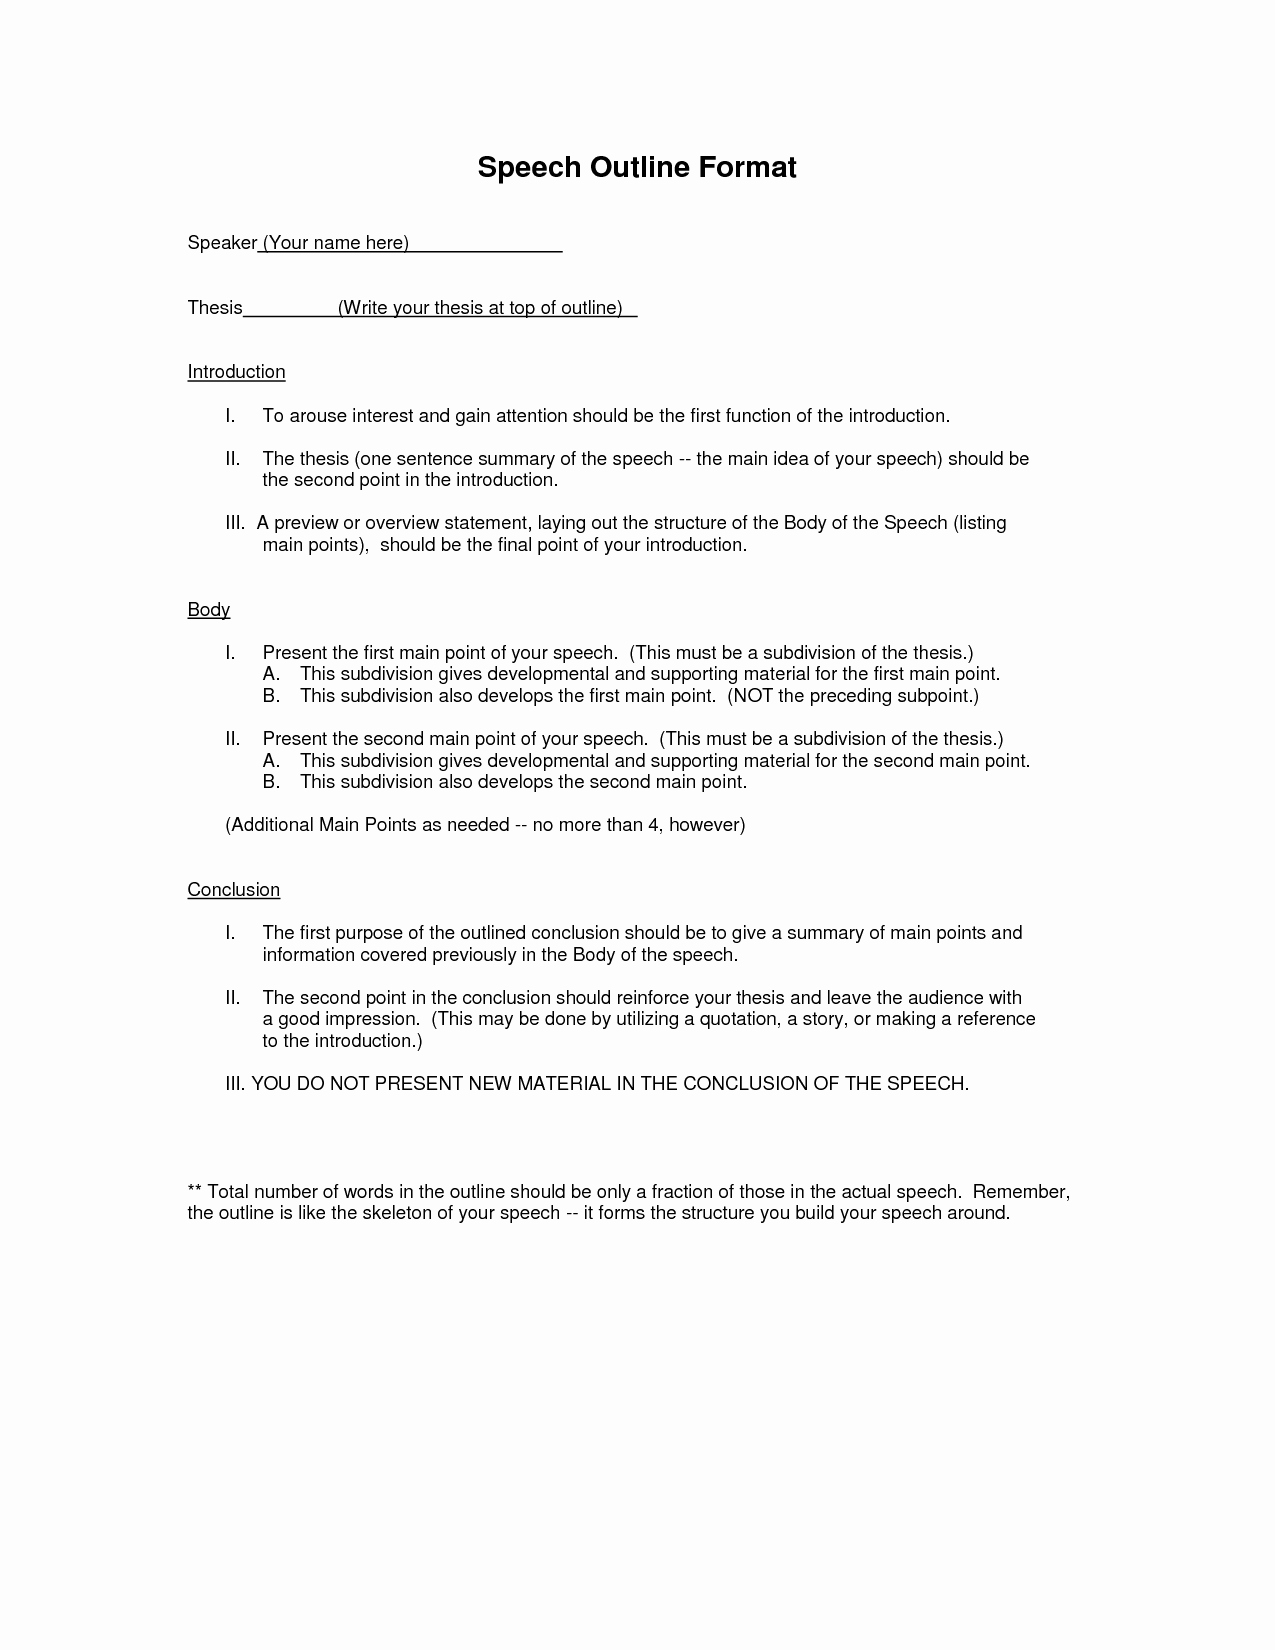 Mla format Outline for Speech Awesome Best S Of Presentation Outline format Example